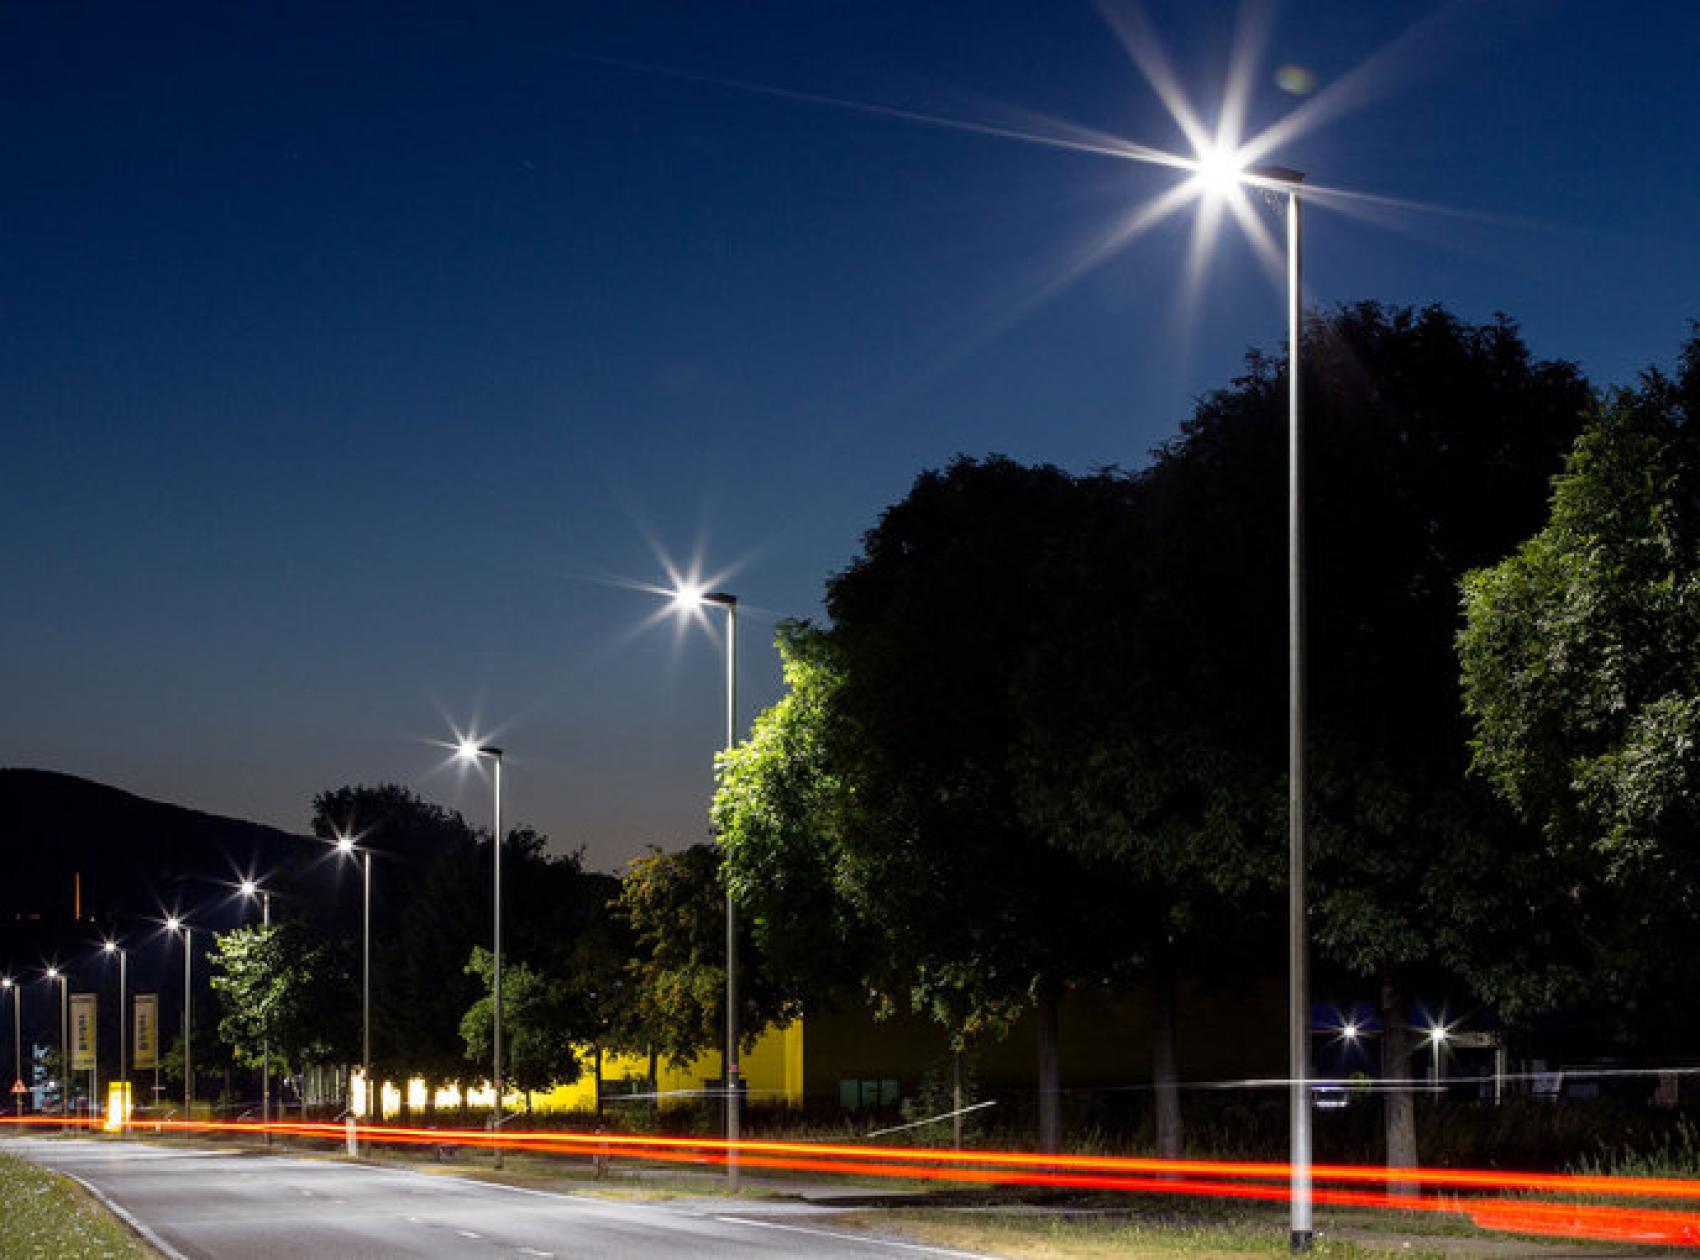 Municipalities turn off street lights at night to save electricity | 3e-news